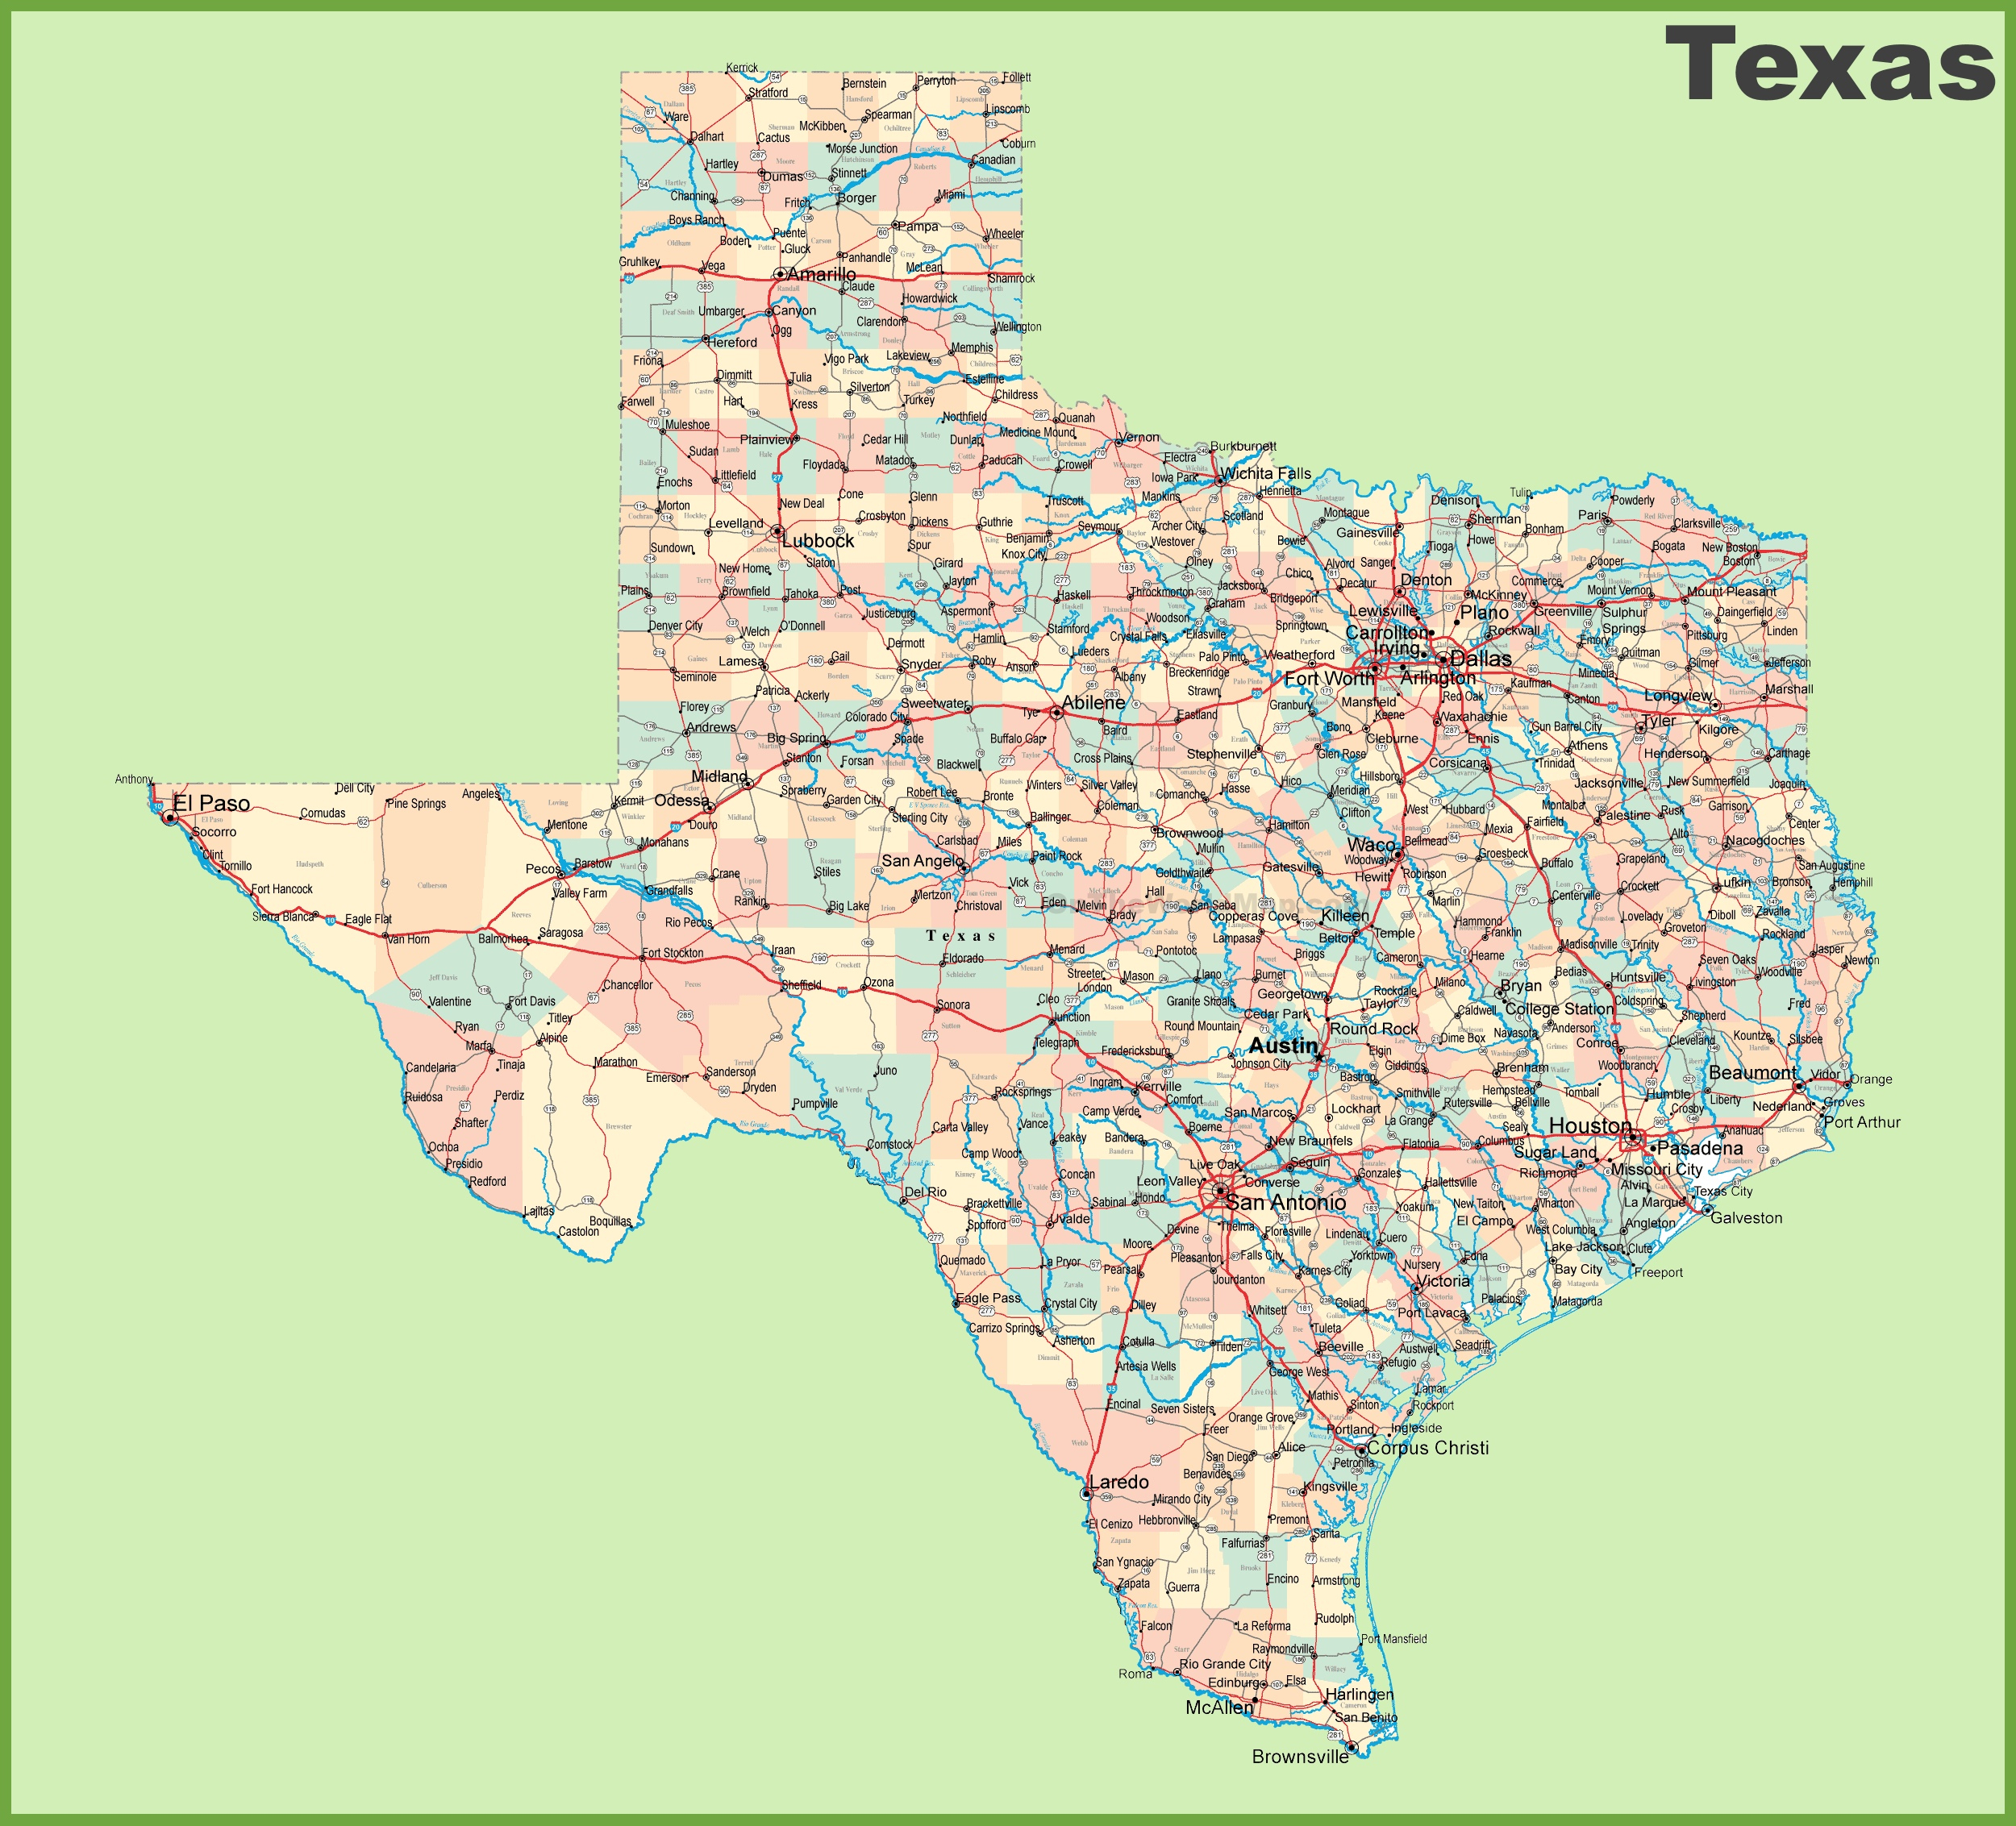 Road Map Of Texas With Cities - Texas Road Map 2018